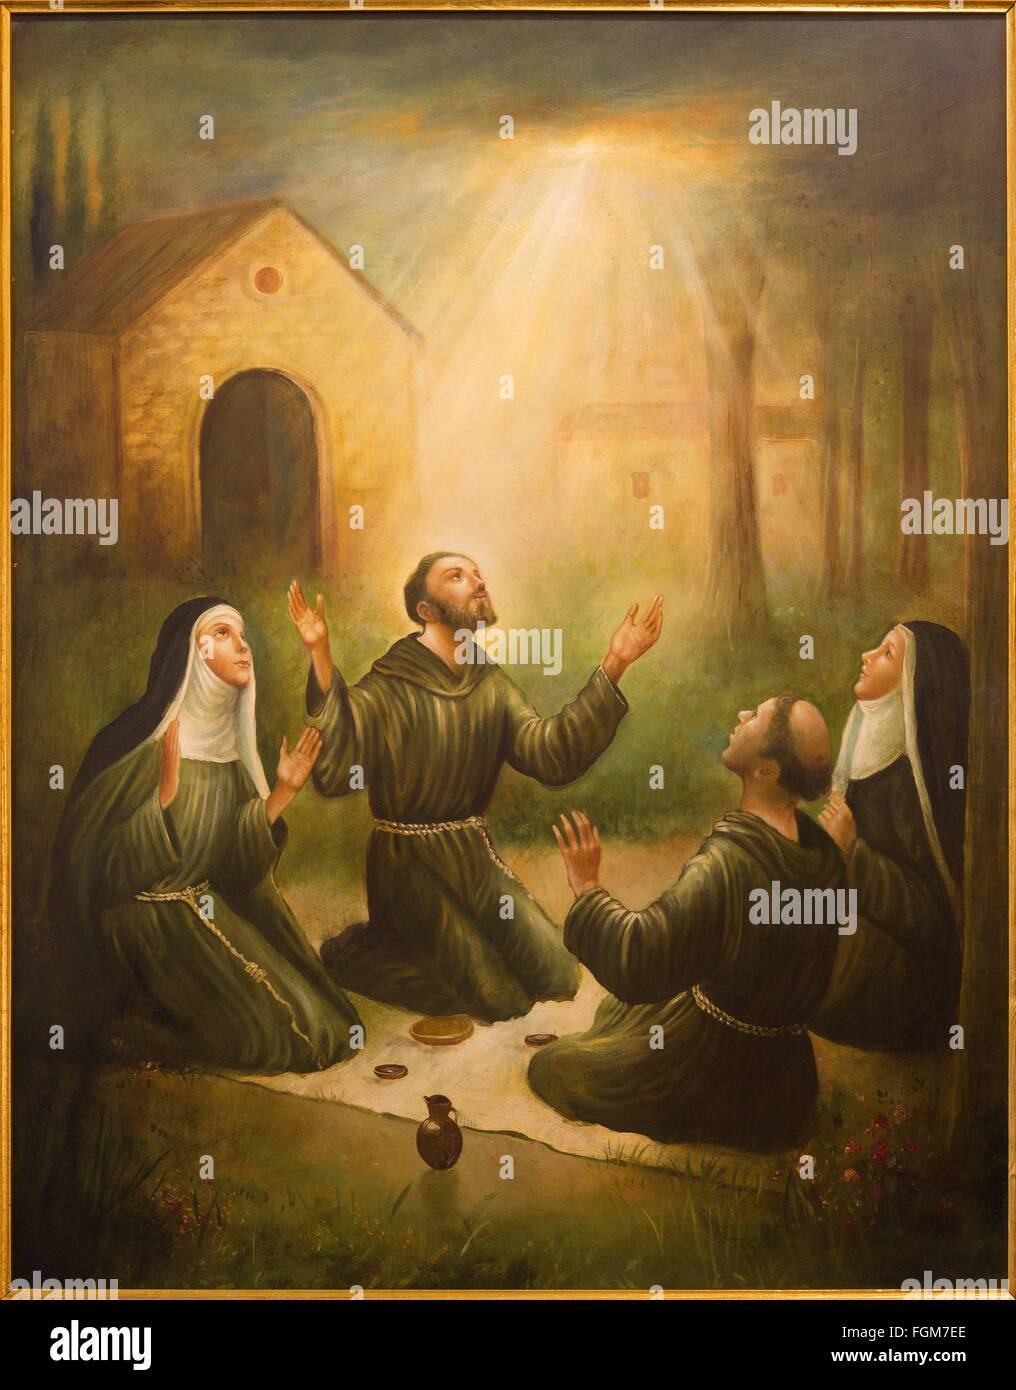 CORDOBA, SPAIN - MAY 27, 2015: The St. Francis of Assisi and St. Clara at prayer. Paint from 20. cent. by unknown artist. Stock Photo